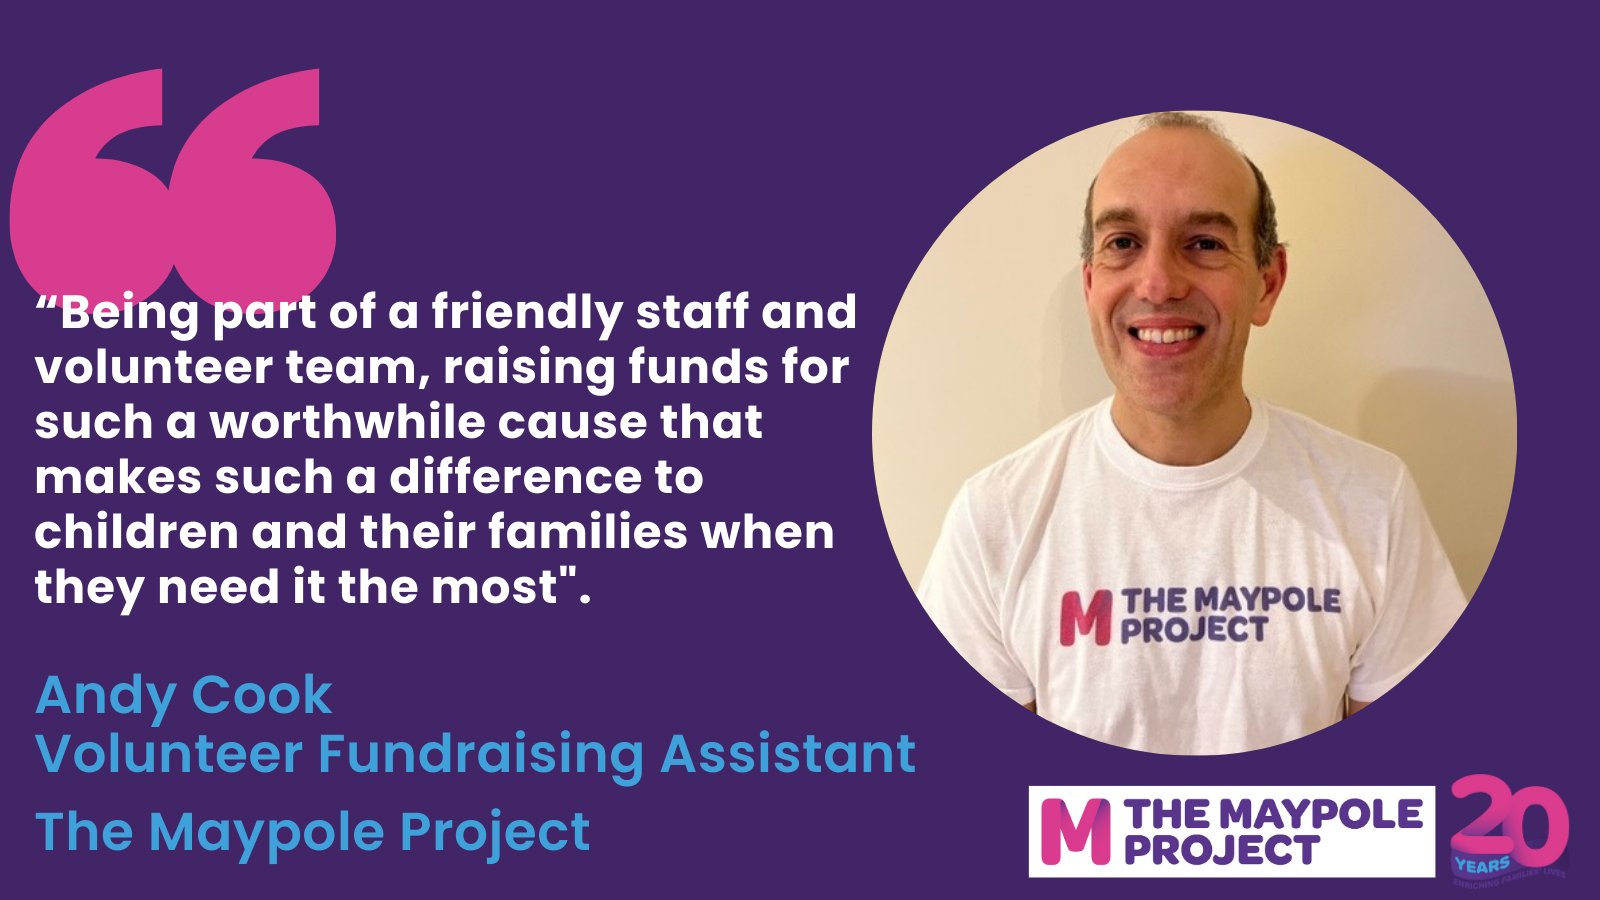 Image with quote from The Maypole Project Volunteer Fundraising Assistant, Andy Cook. Words of quote: &#34;Being part of a friemdly staff and volunteer team, raising funds for such a worthwile cause that makes such a difference to children and their families when they need it the most&#34;